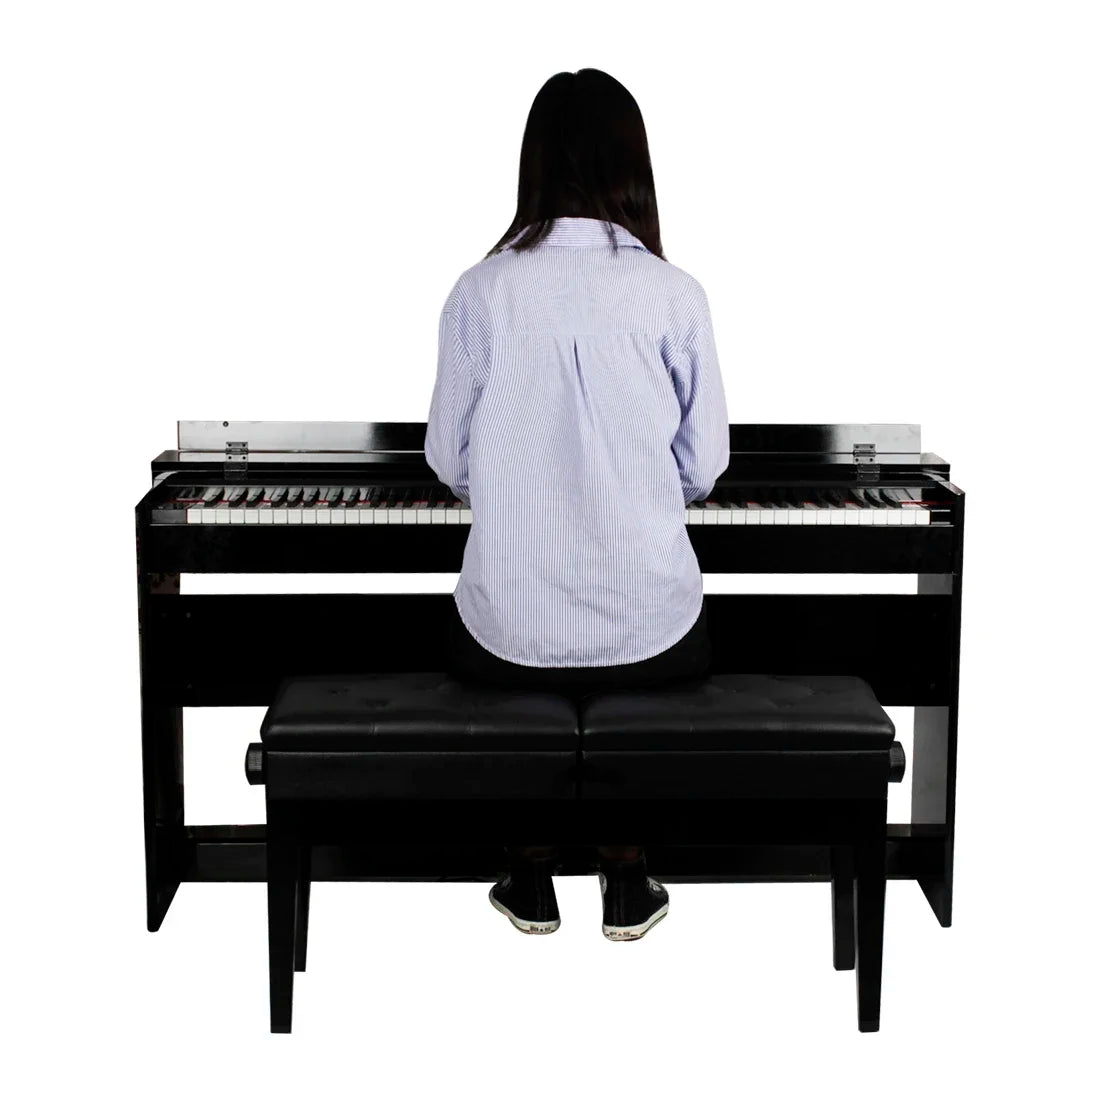 SLADE 88 Keys Upright Piano Digital Electronic Piano Weighted Keyboard Professional Keyboard Instrument for Beginner Practice